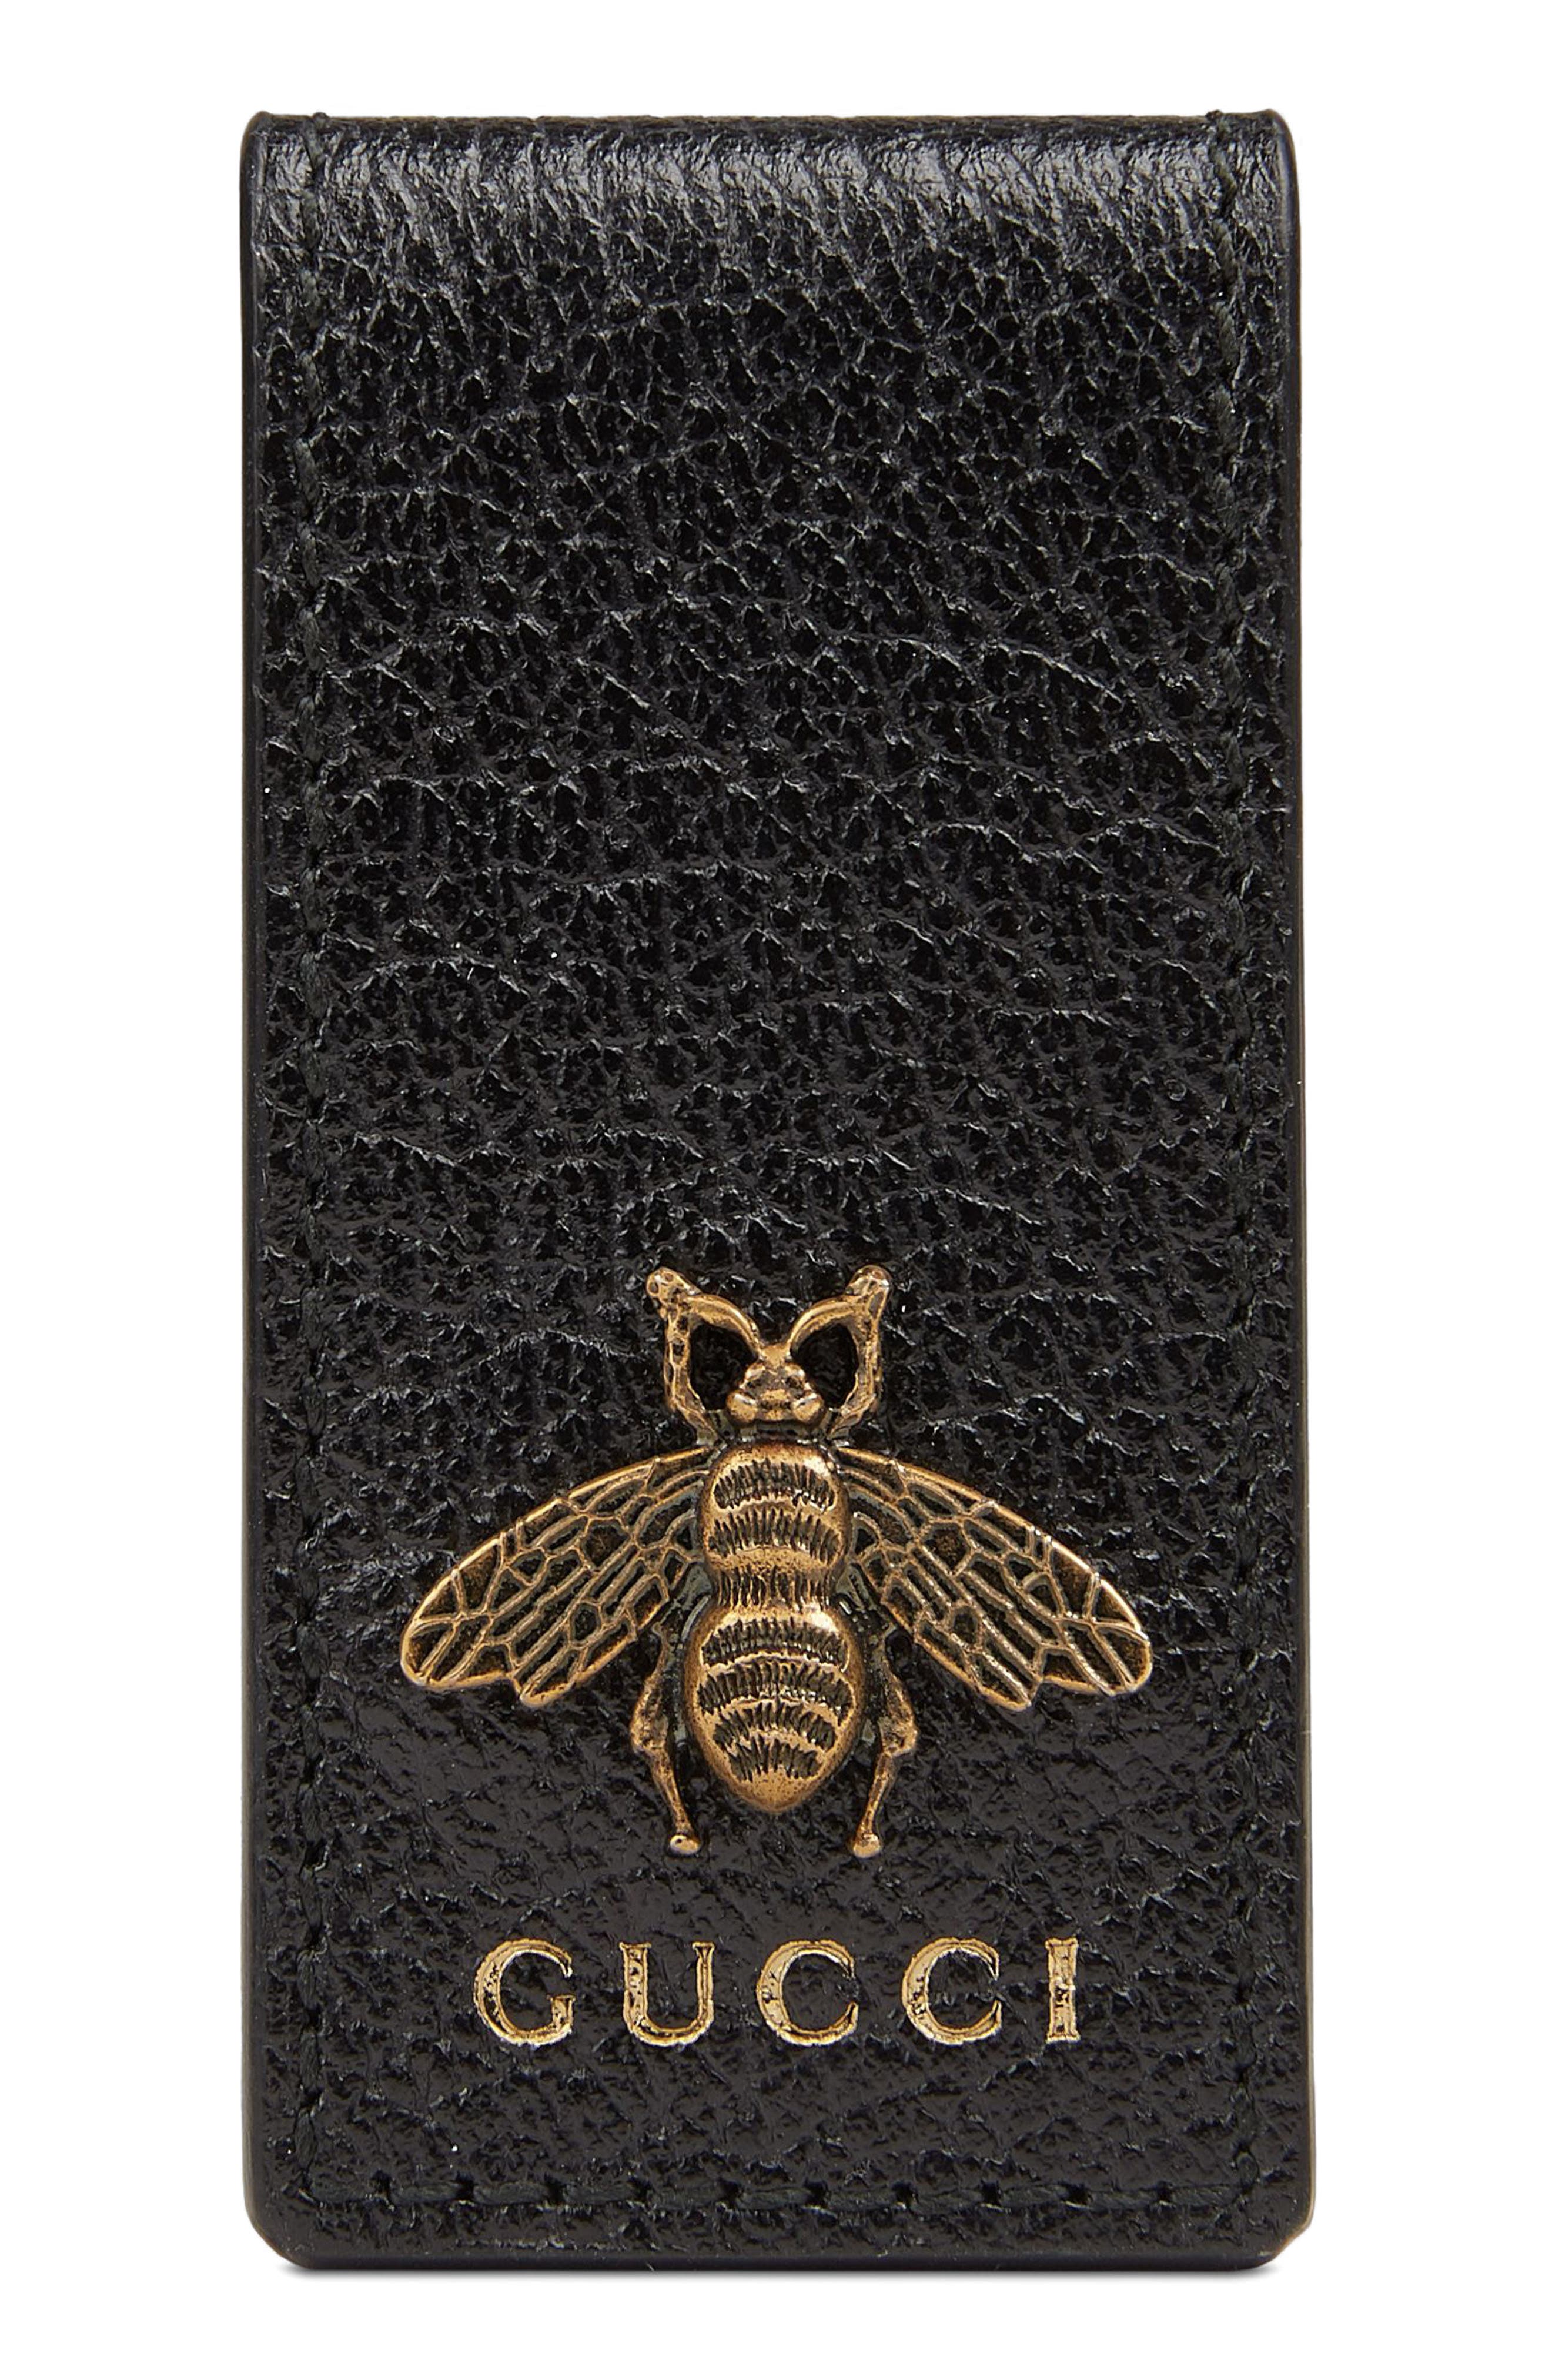 Gucci Bee Leather Money Clip | Nordstrom